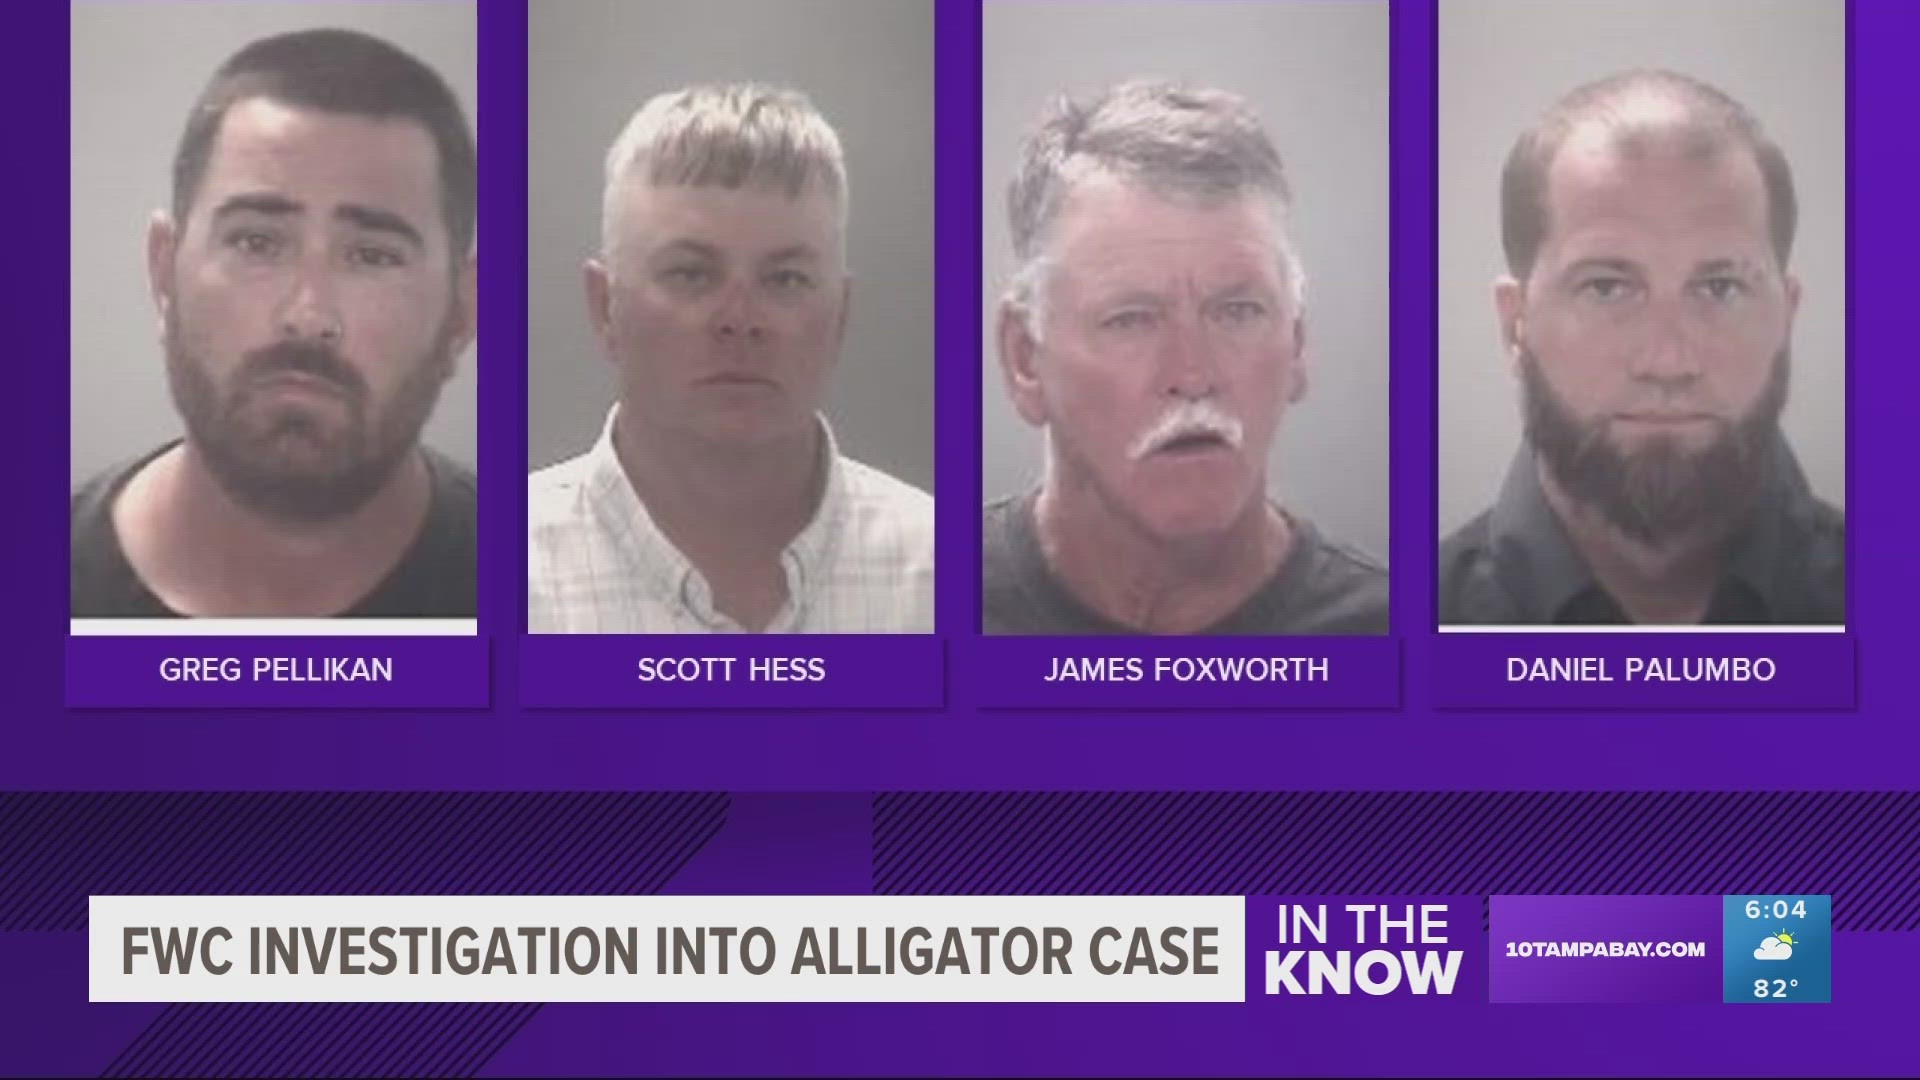 All four of the men have been charged with illegal take of an alligator.